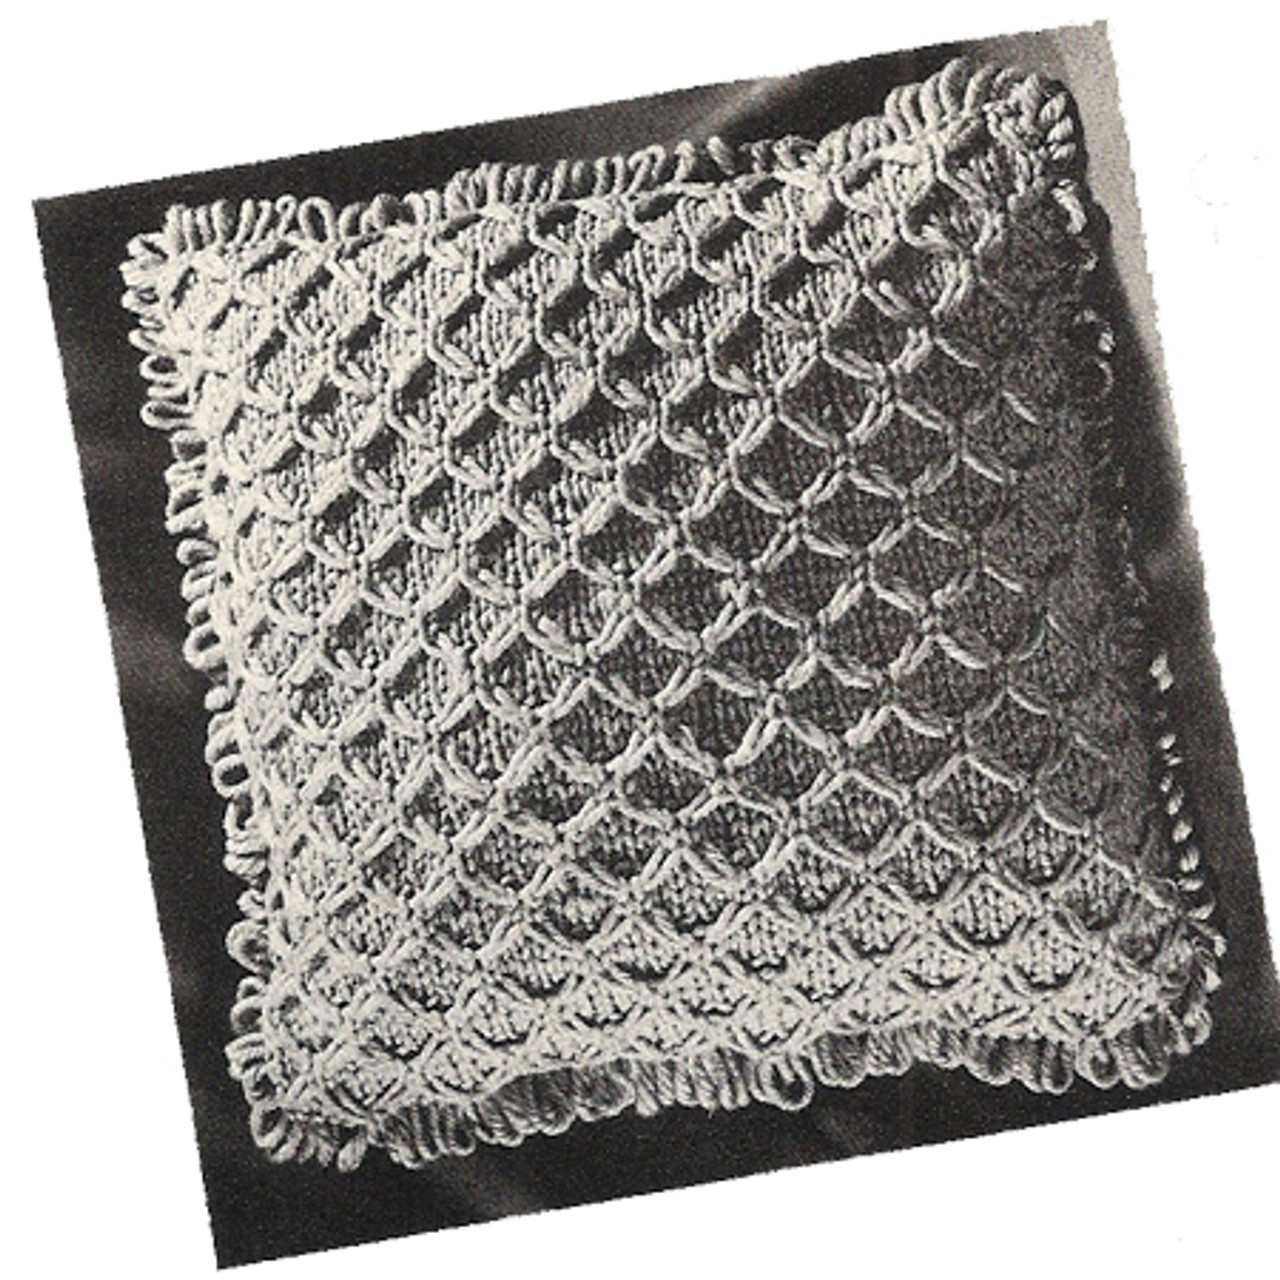 knitting pattern for honeycomb pillow, vintage 1960s